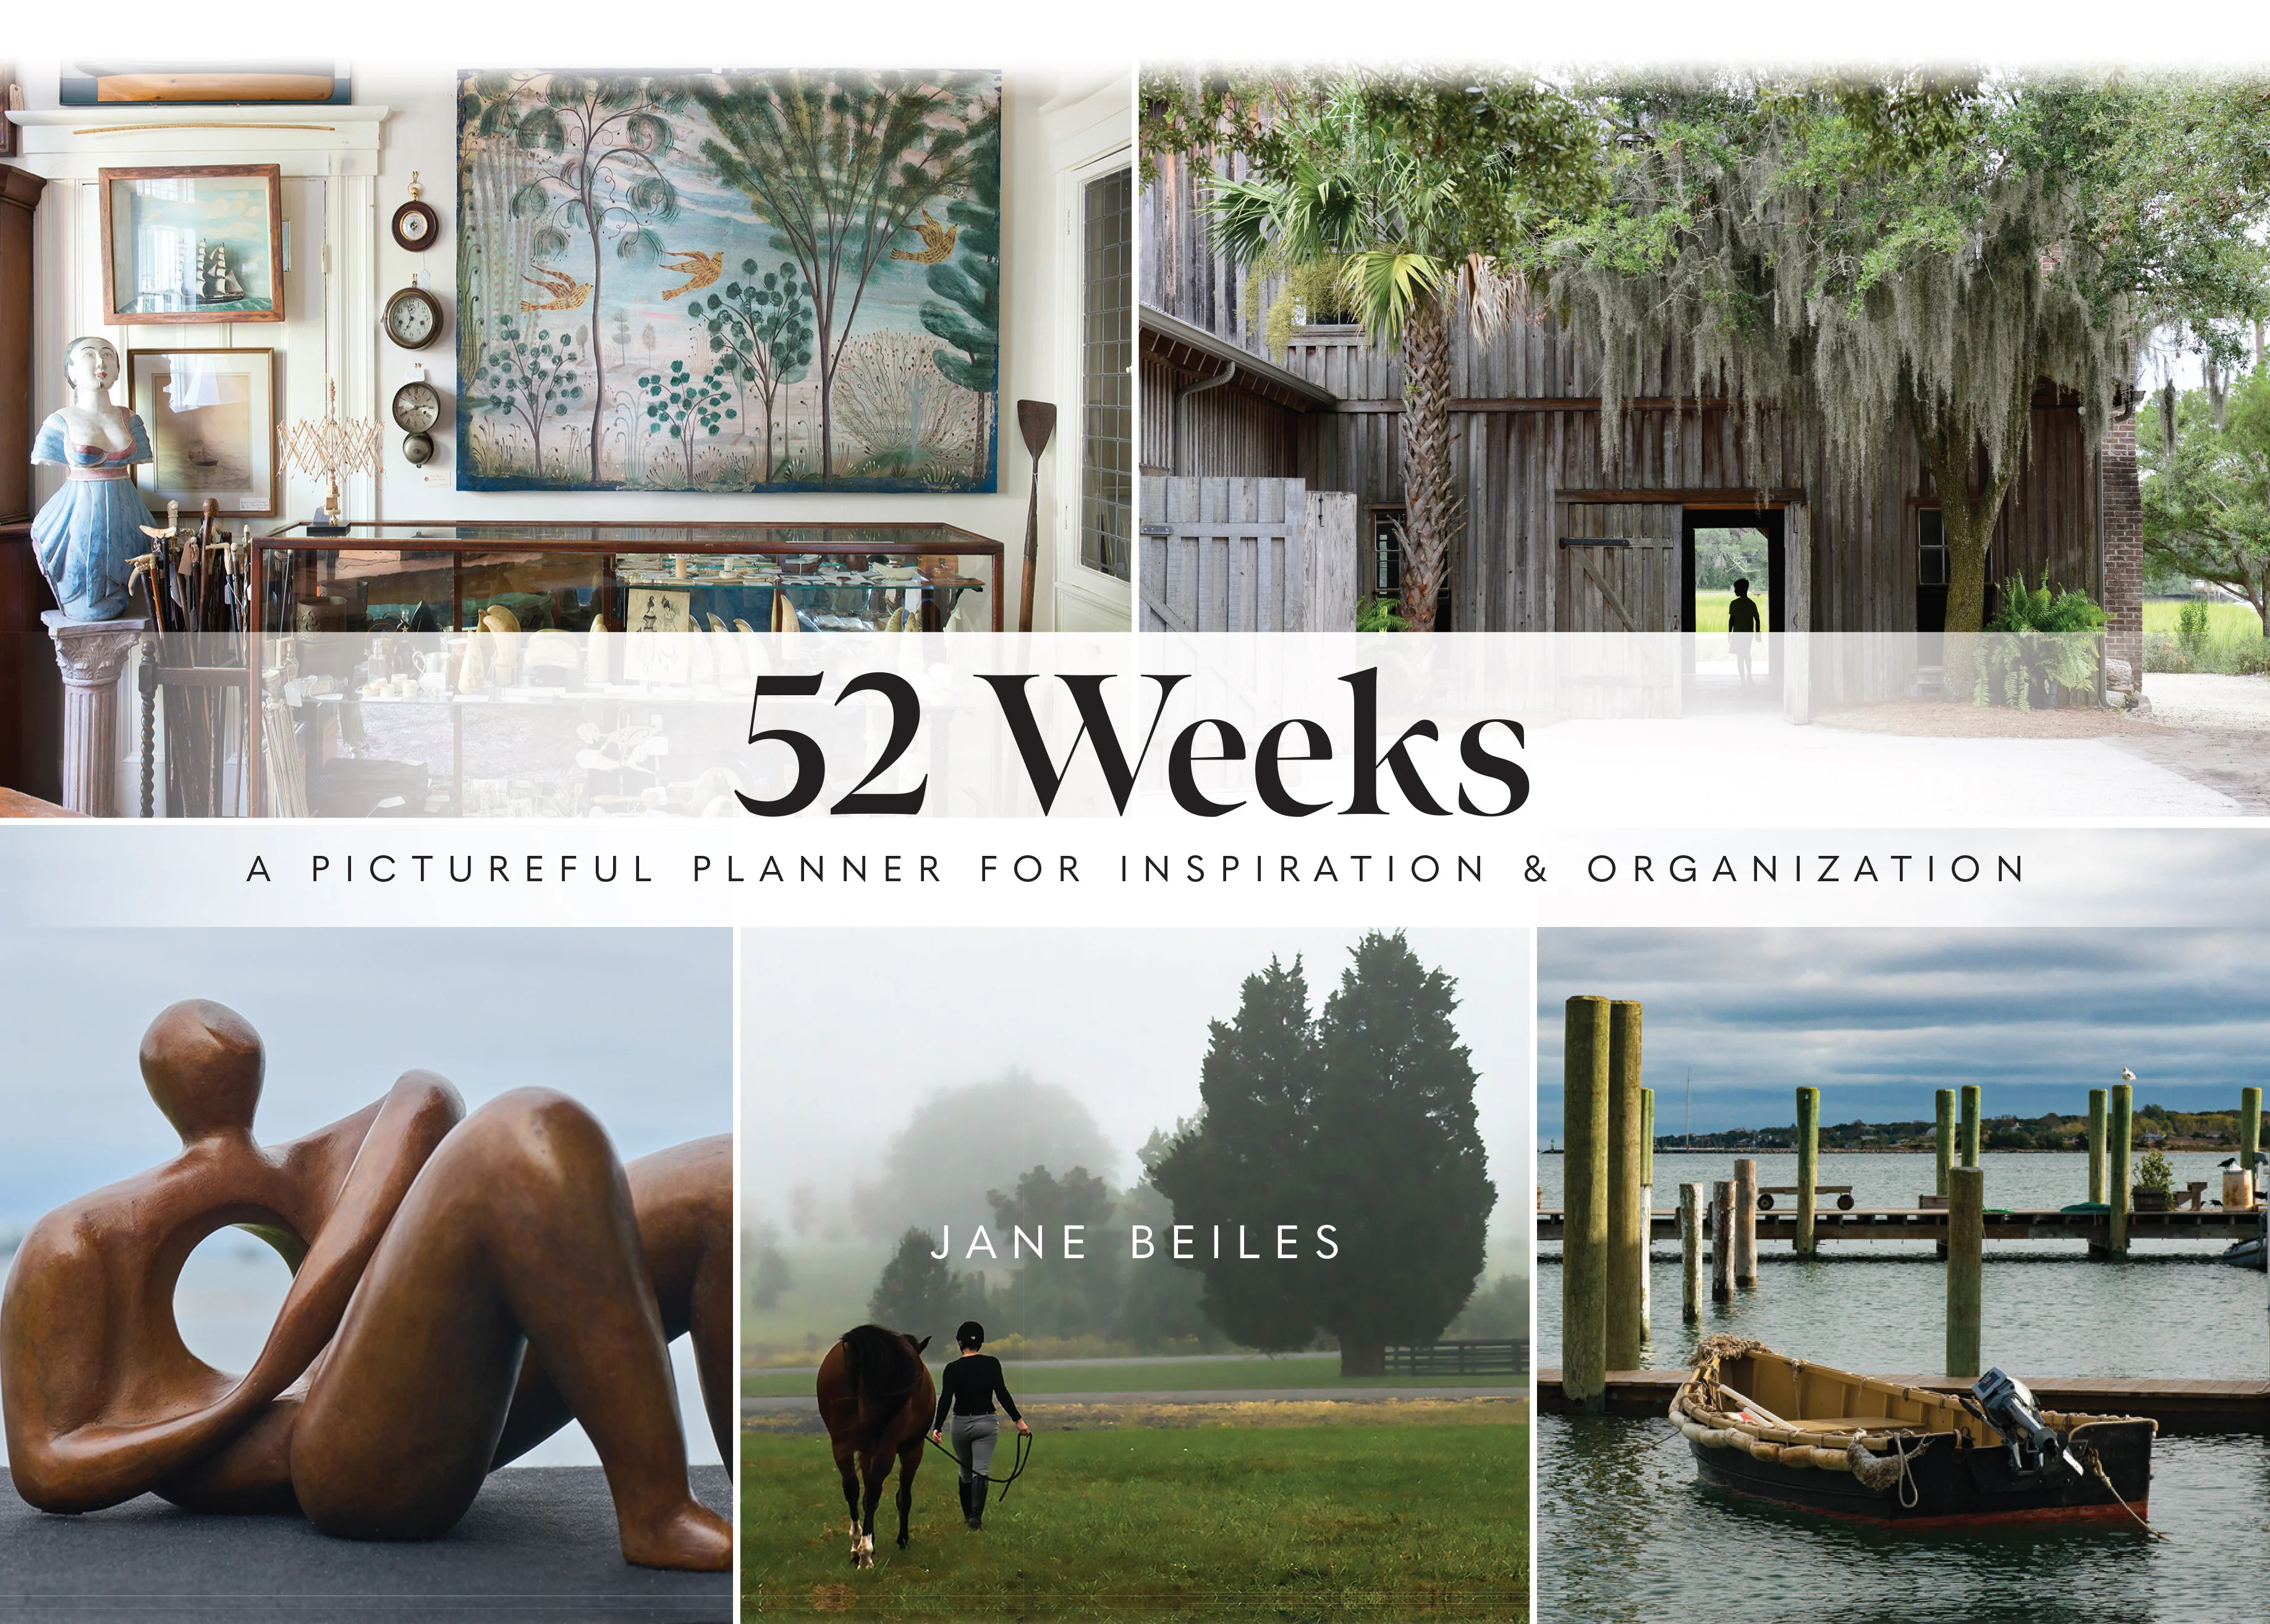 52 Weeks: A Pictureful Planner for Inspiration & Organization by Jane Beiles | Jane Beiles Photography